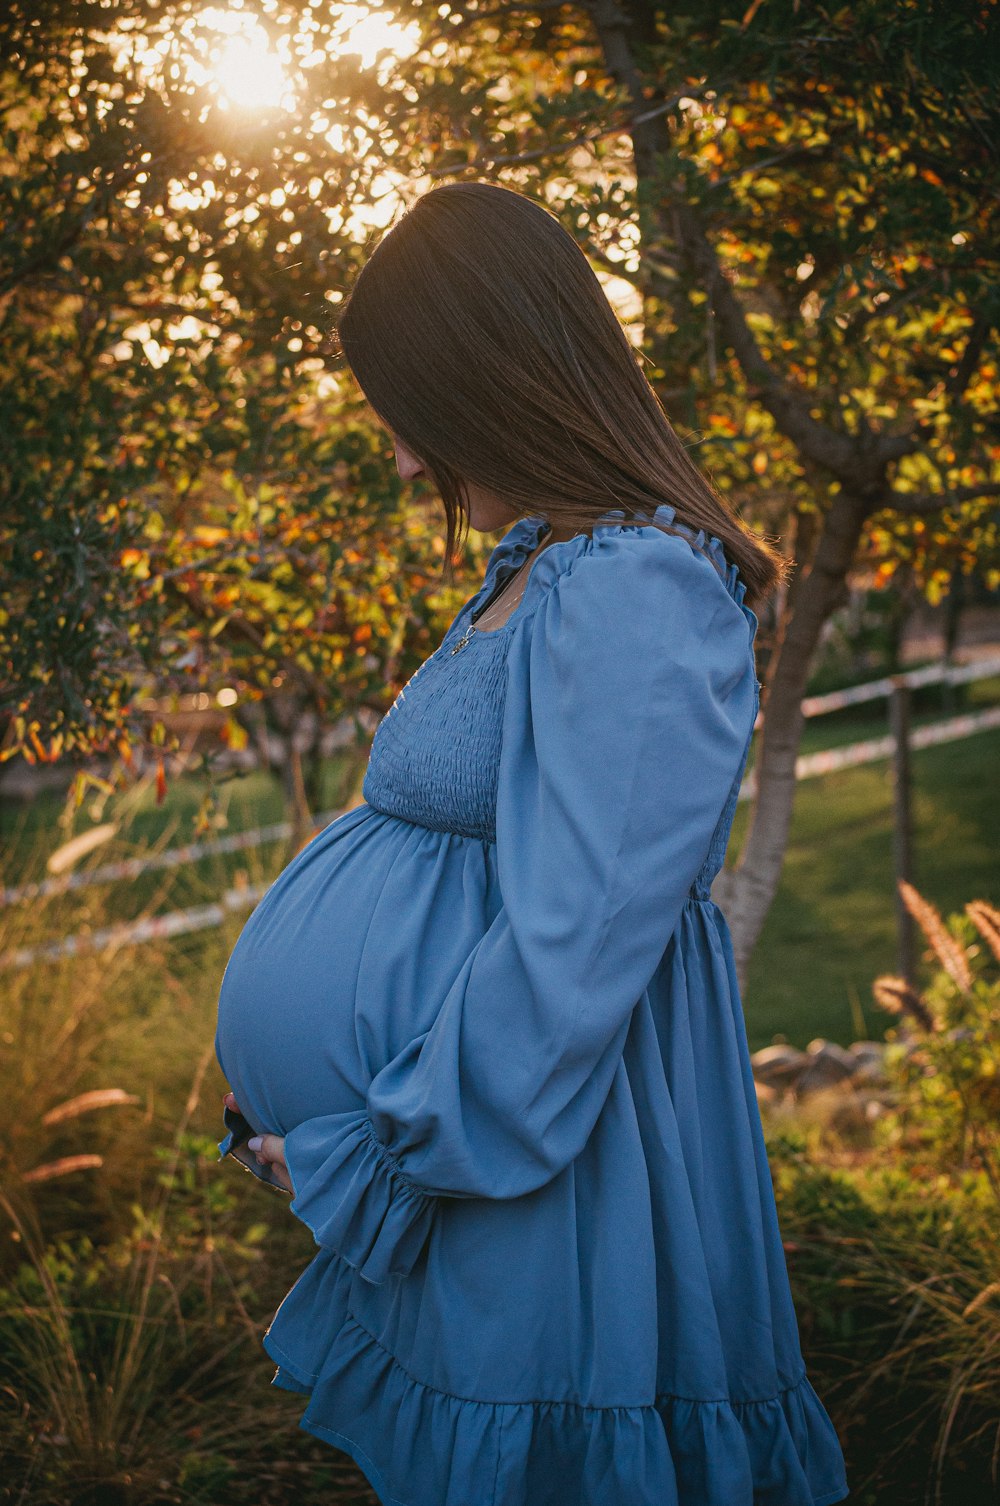 a pregnant woman in a blue dress standing in a field